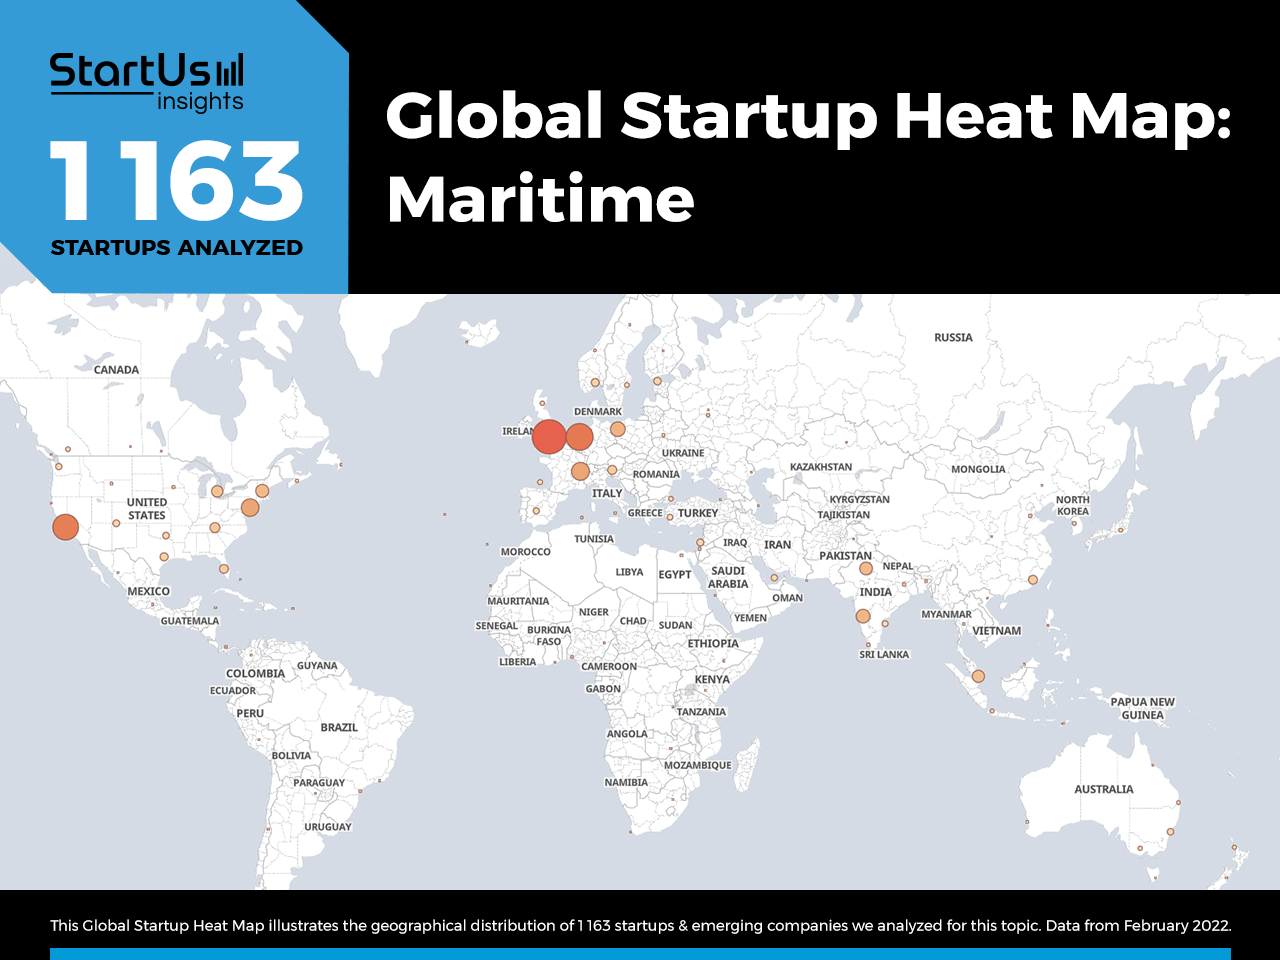 Maritime-Trends-Innovations-TrendResearch-Heat-Map-StartUs-Insights-noresize